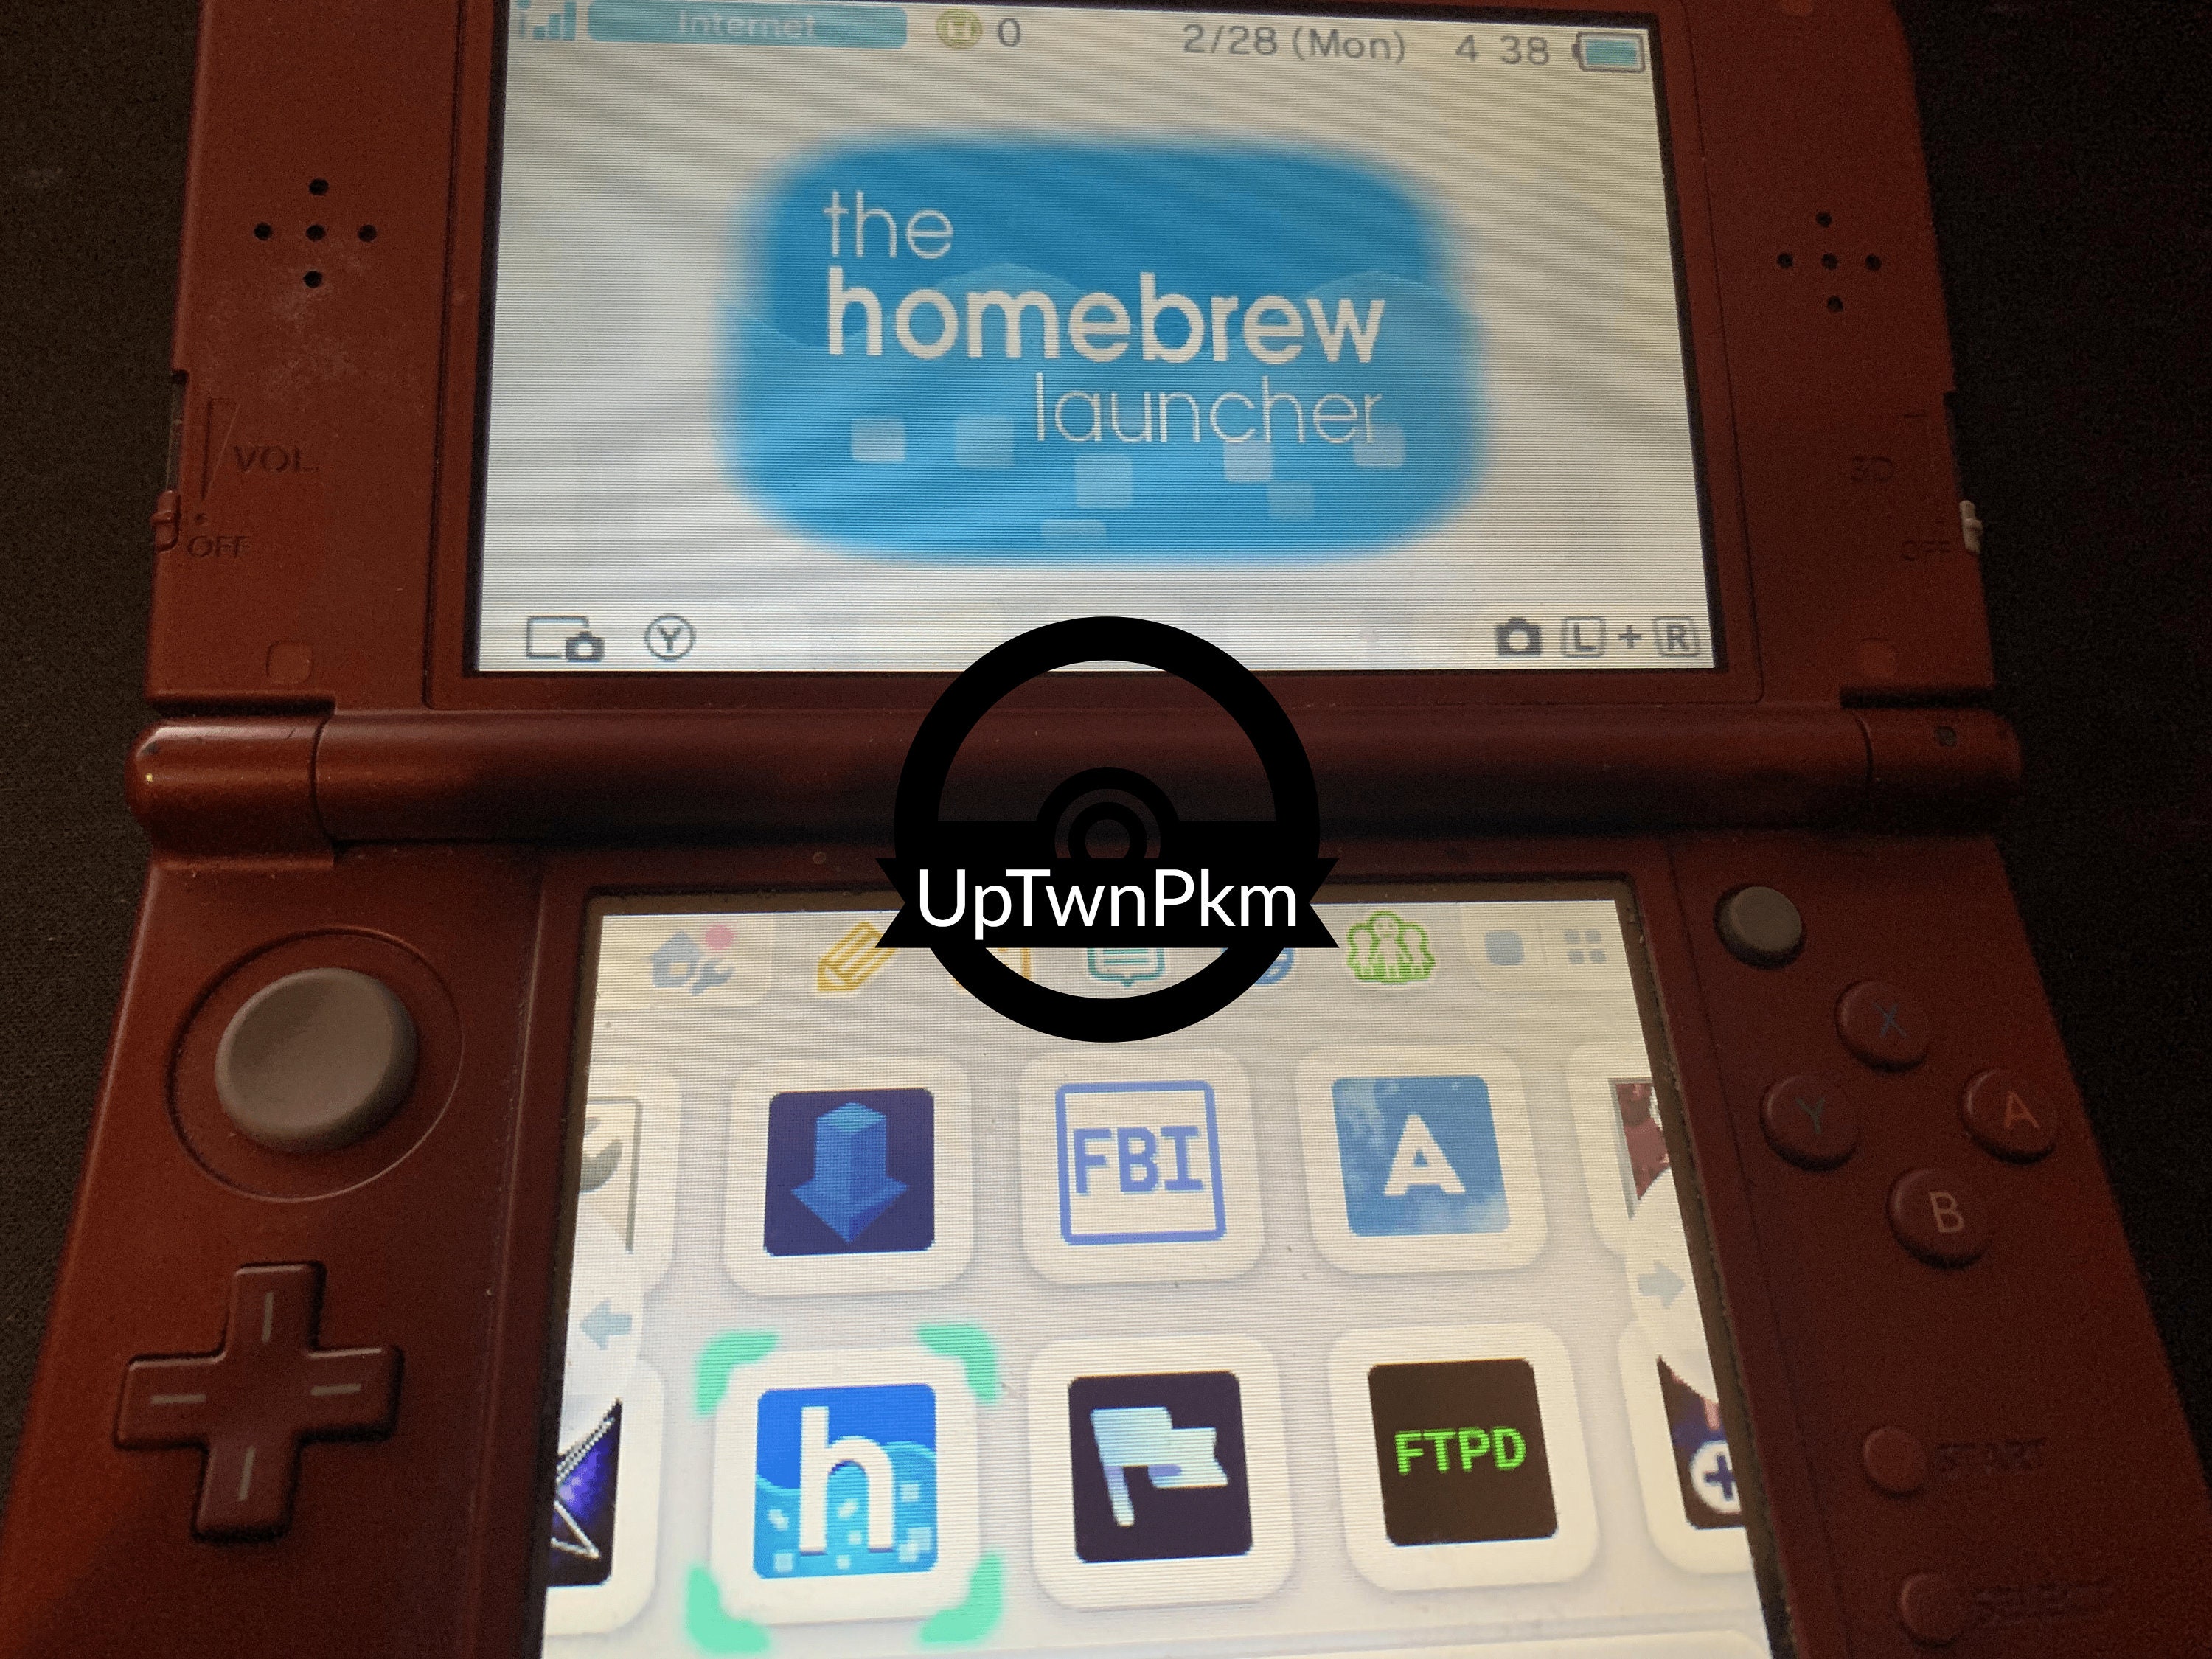 3DS Homebrew Applications - Another way to find 3DS Homebrew from your  browser!